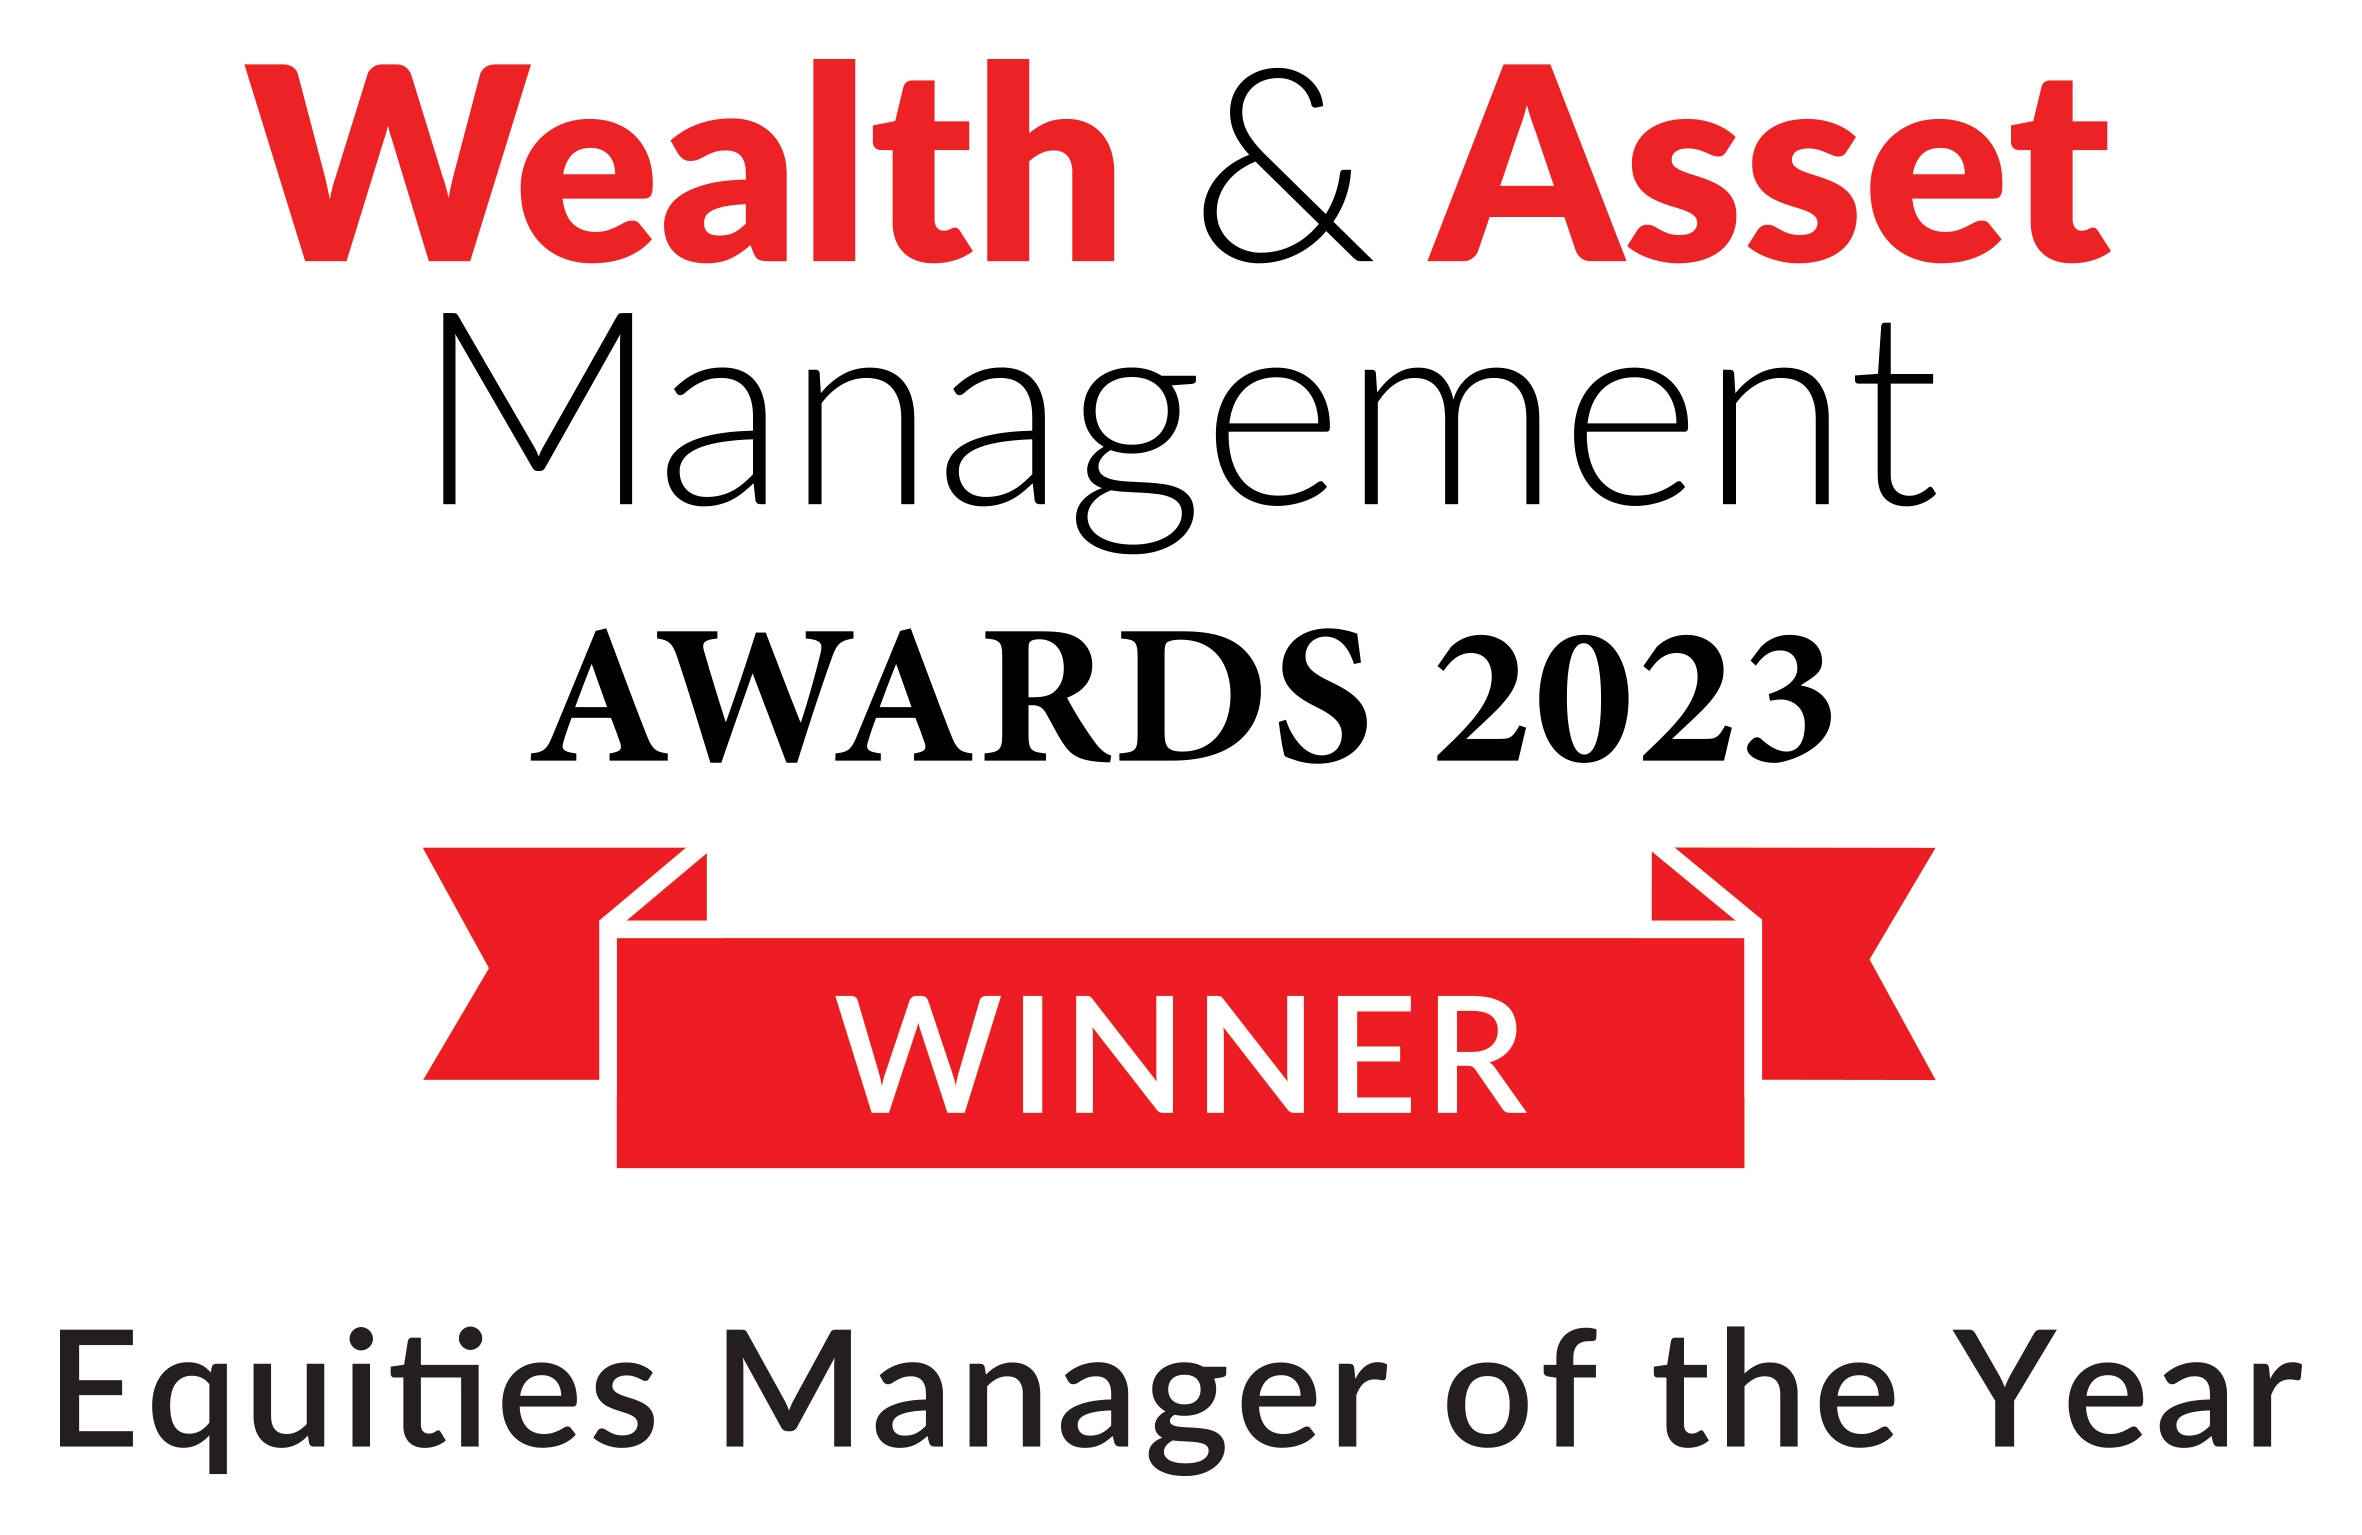 Wealth & Asset Management Awards 2023 Equities Manager of the Year